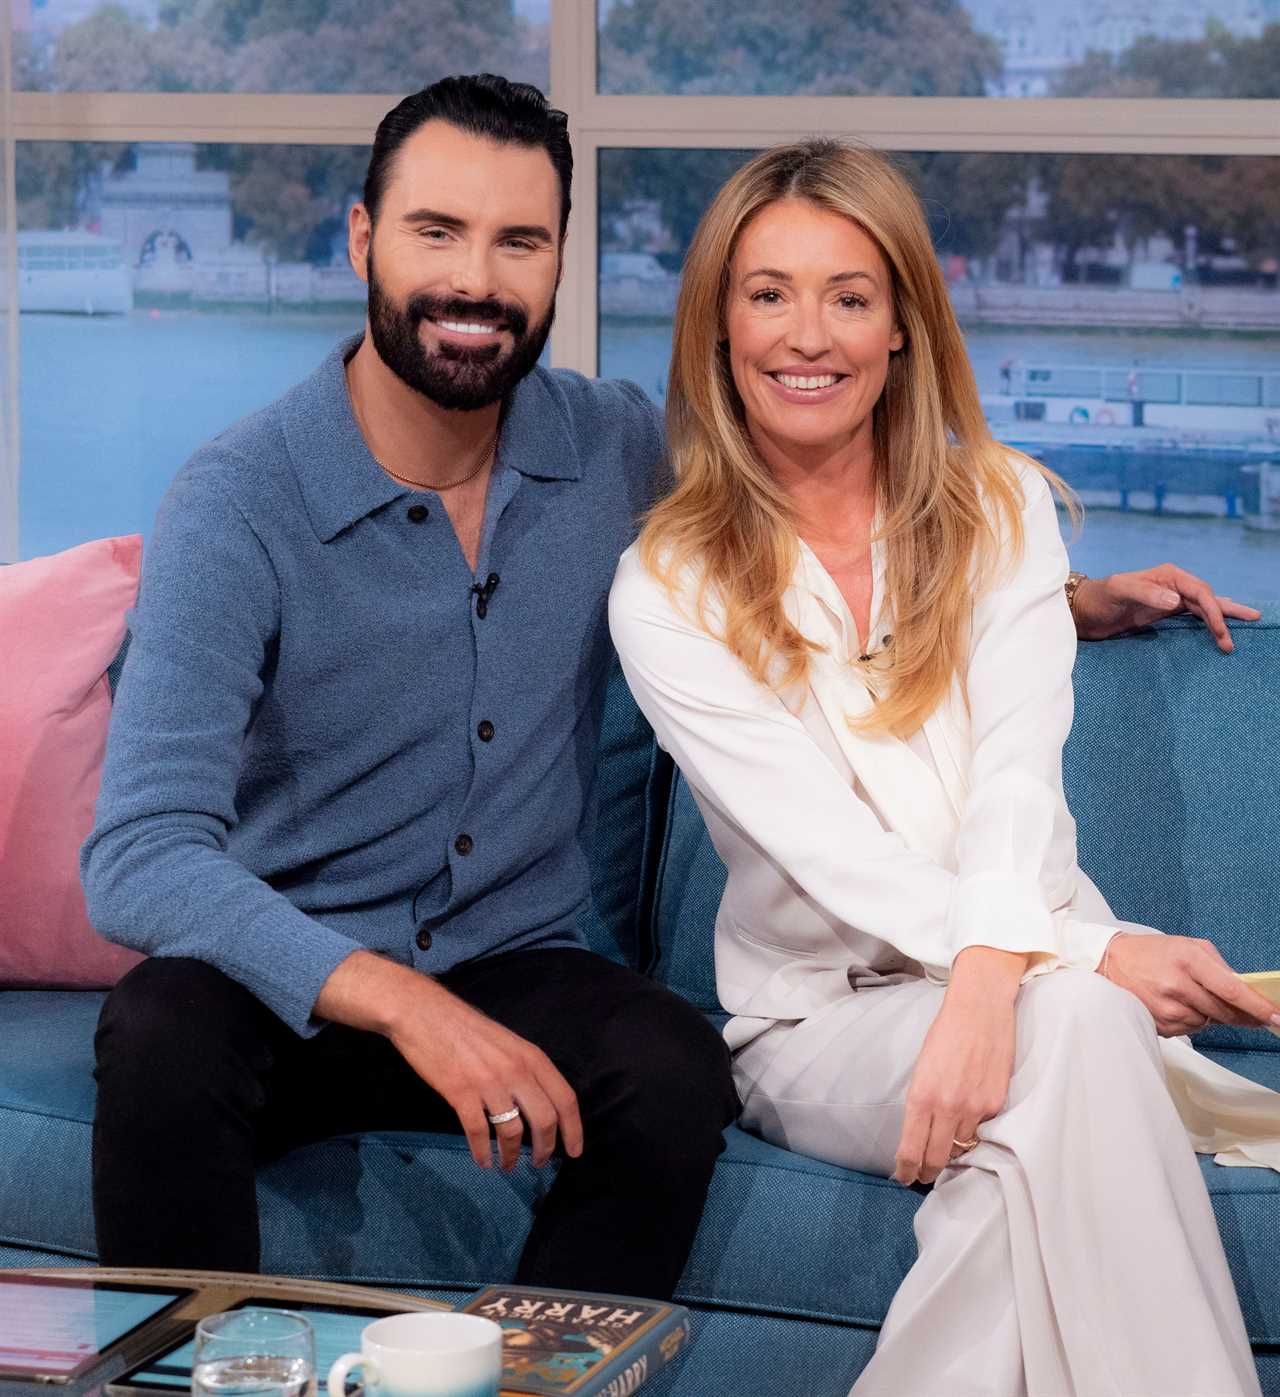 Body Language Expert Reveals the 'Most Compatible' Presenters on This Morning